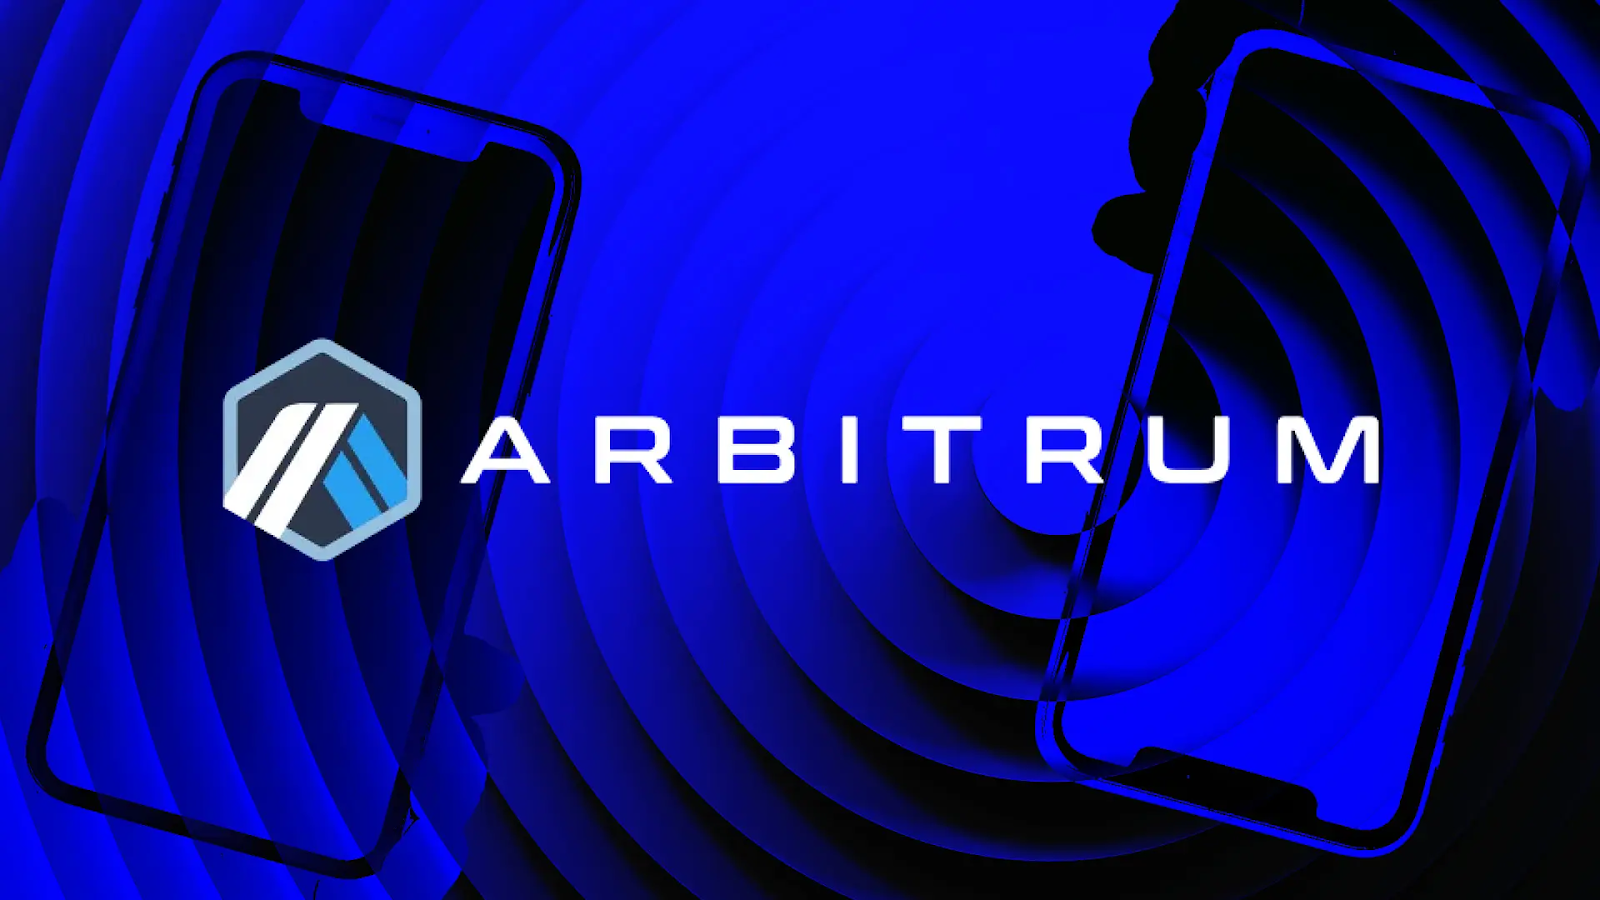 Arbitrum To Release Its Own Token At The ‘Right Time’